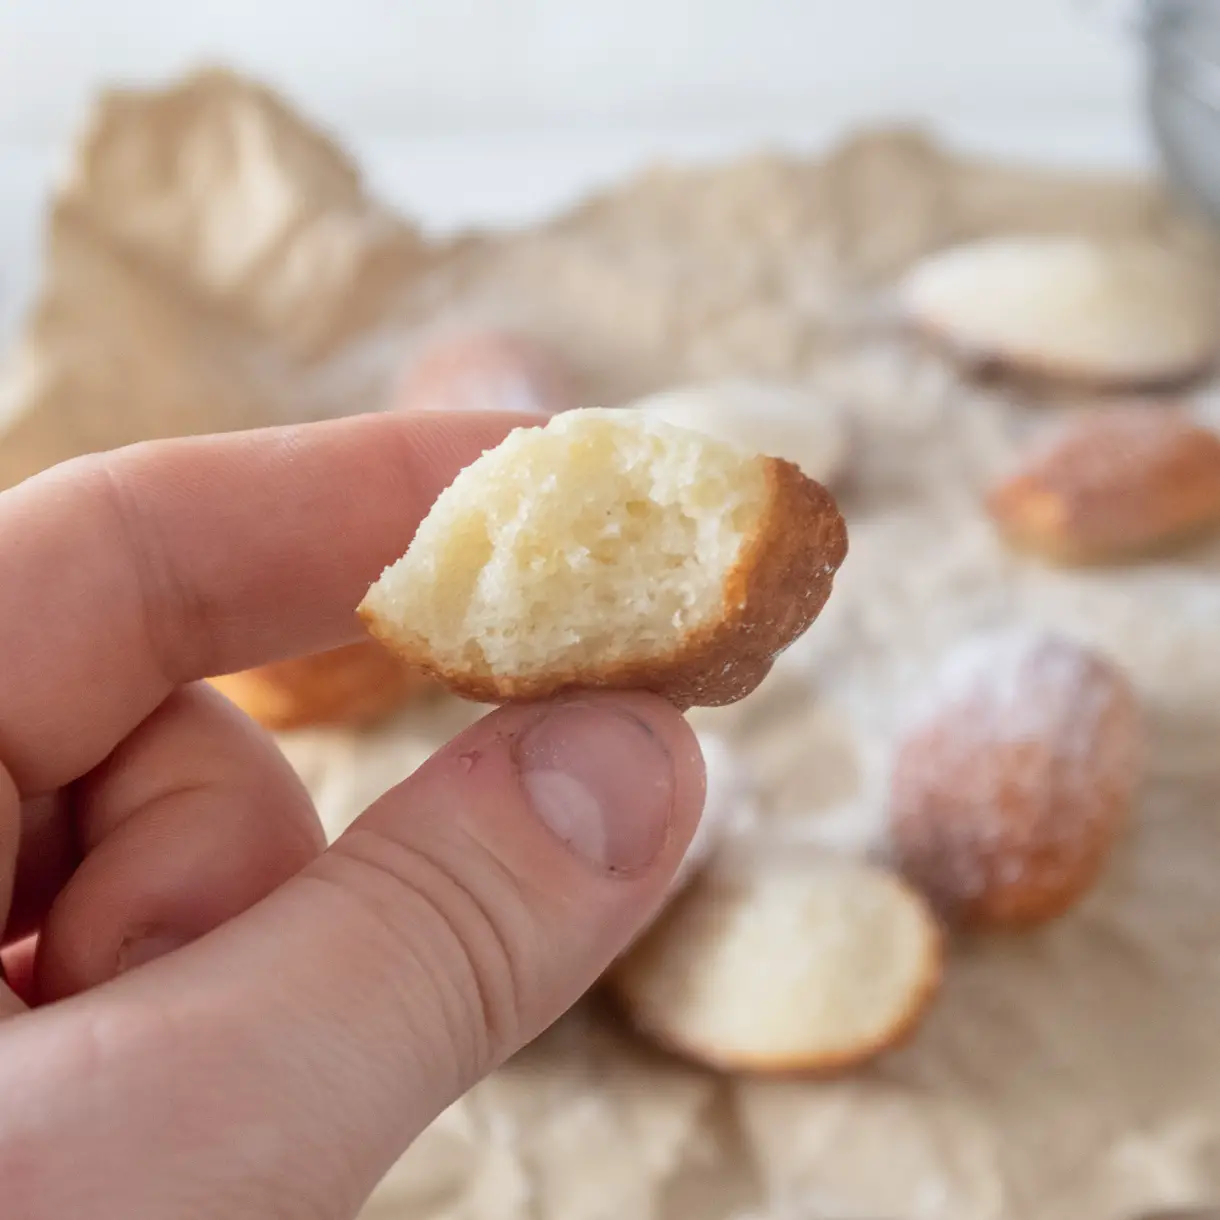 Close up of a half-eaten madeleine to show the crumb texture.